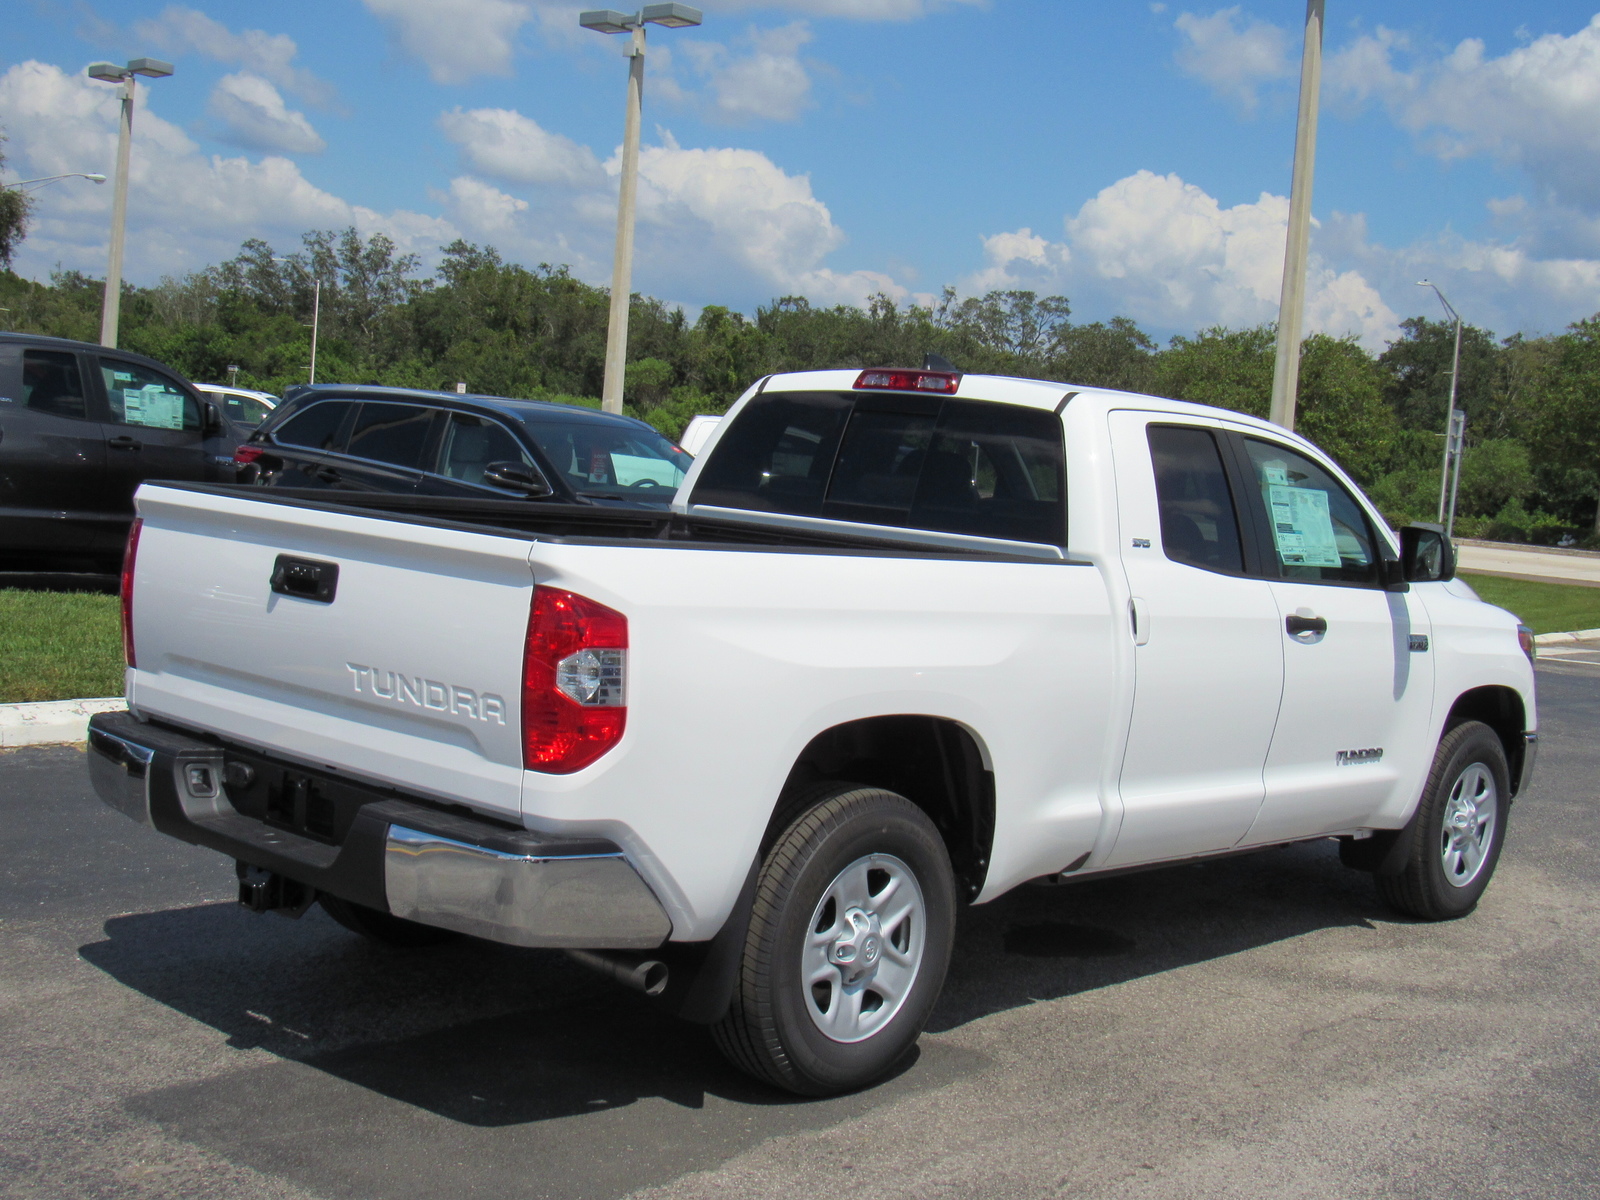 New 2020 Toyota Tundra 2WD SR5 Double Cab 6.5′ Bed 5.7L (Natl)